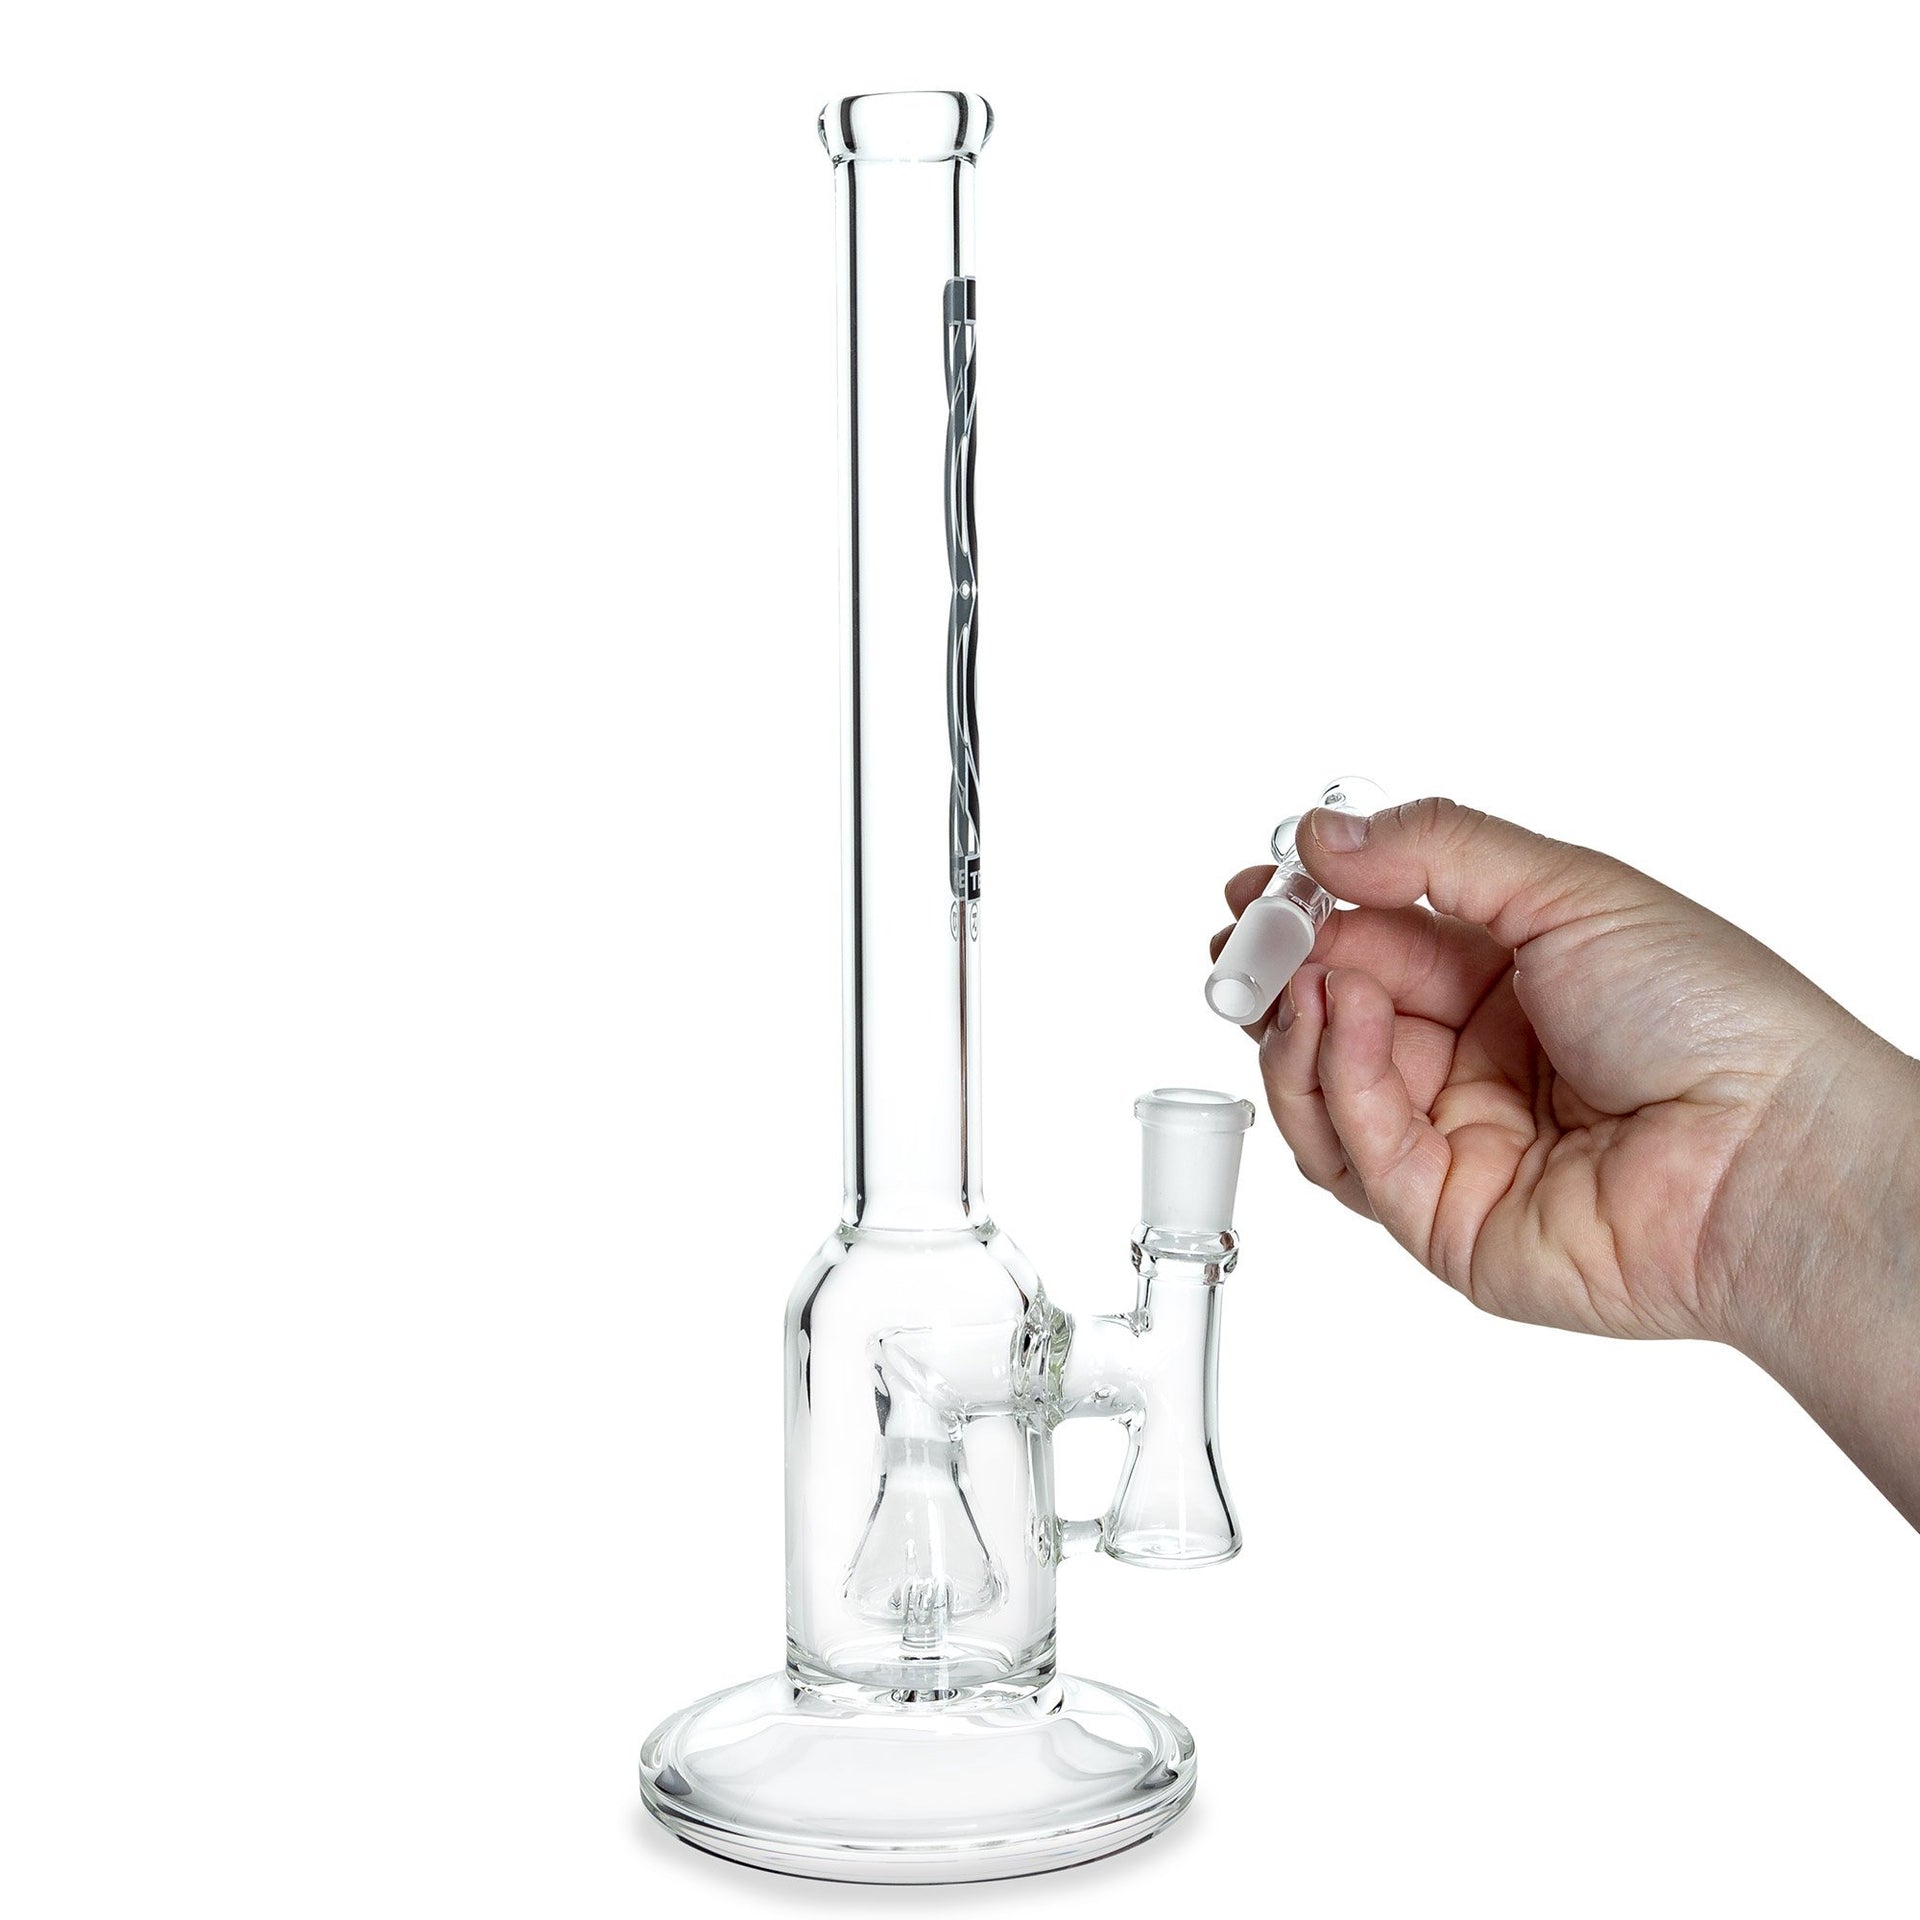 ROOR Tech Slugger - 420 Science - The most trusted online smoke shop.